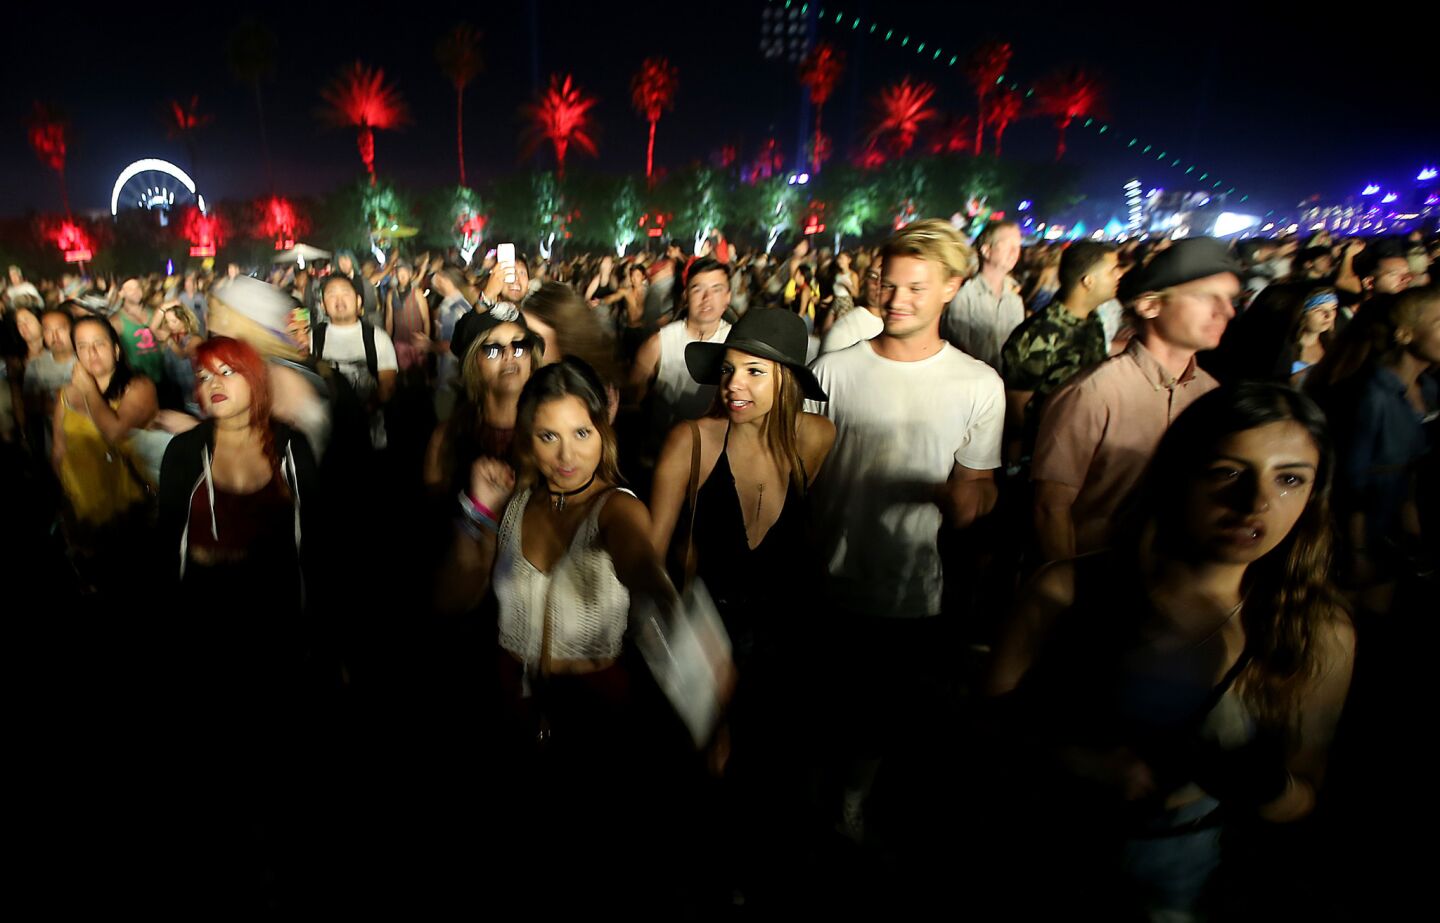 Music fans crowd the Empire Polo Grounds during the Coachella Valley Music and Arts Festival.